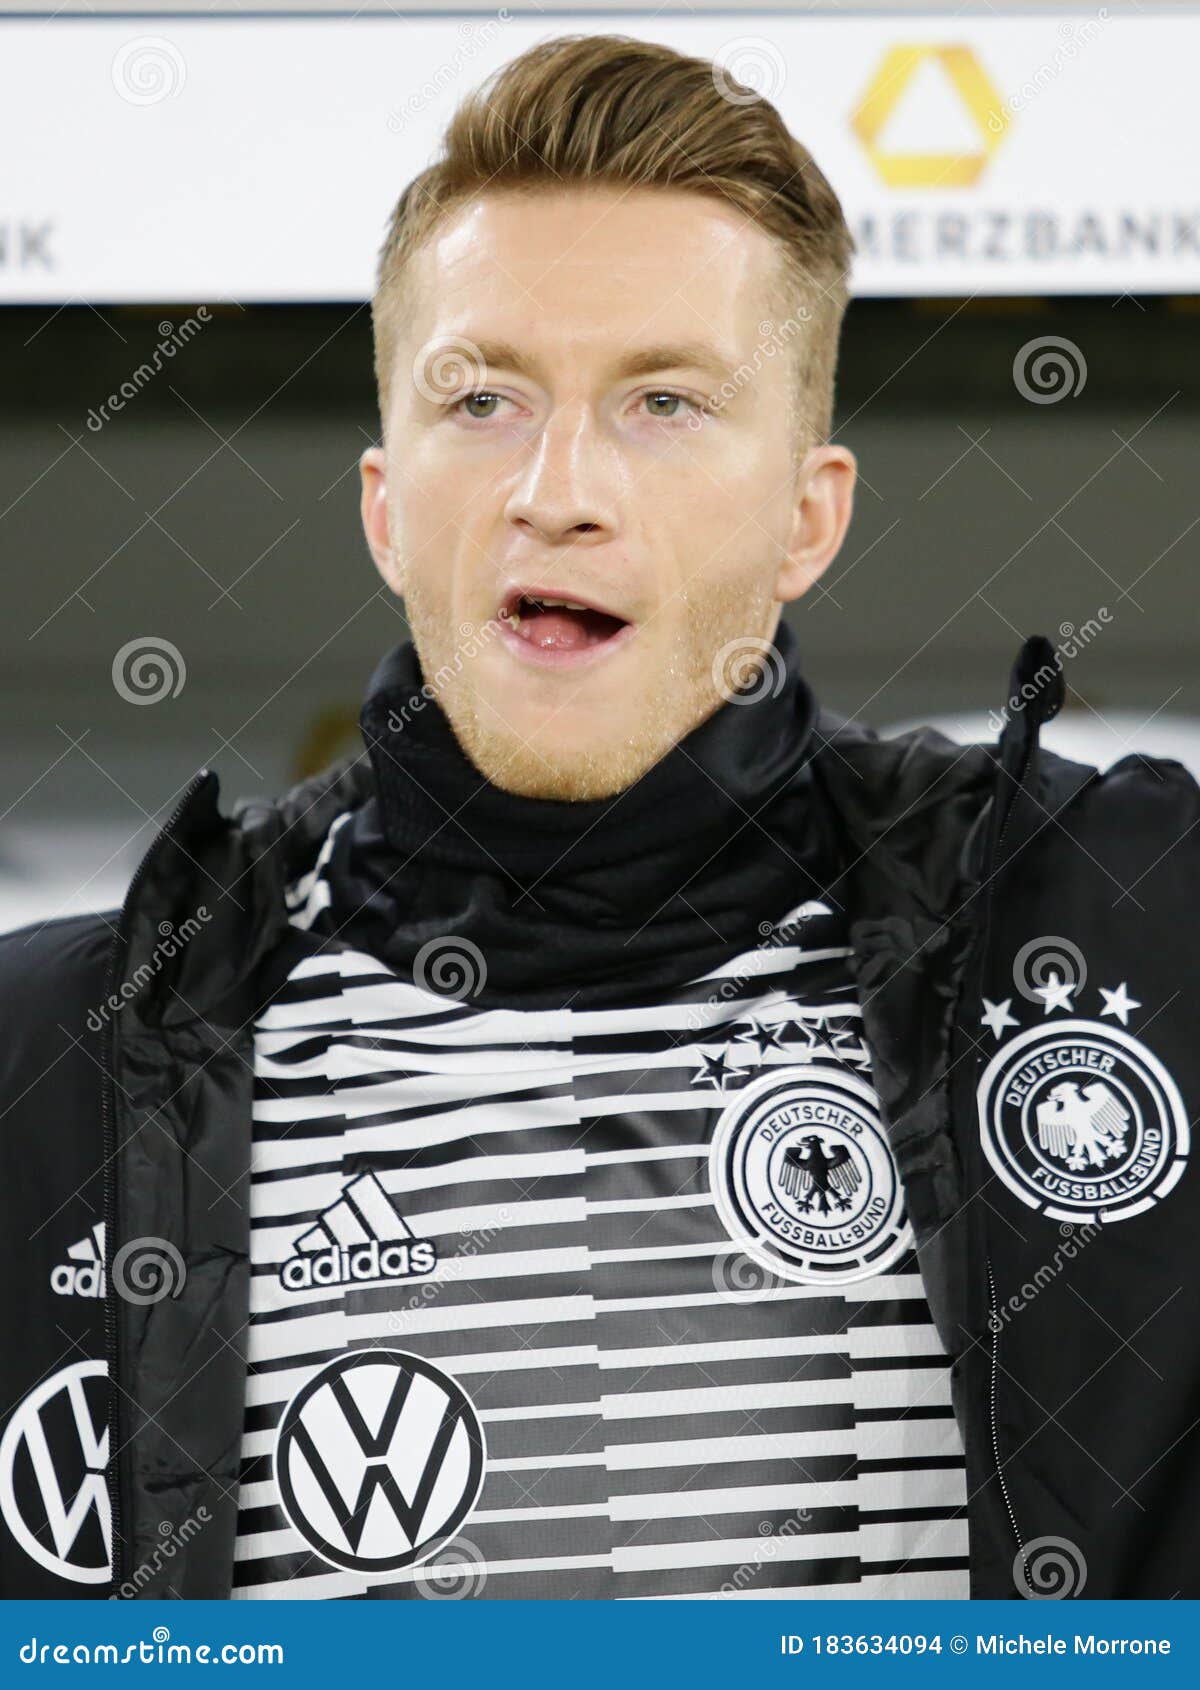 45 Coolest Soccer Player Haircuts in 2023  Reus hairstyle Marco reus  haircut Football hairstyles